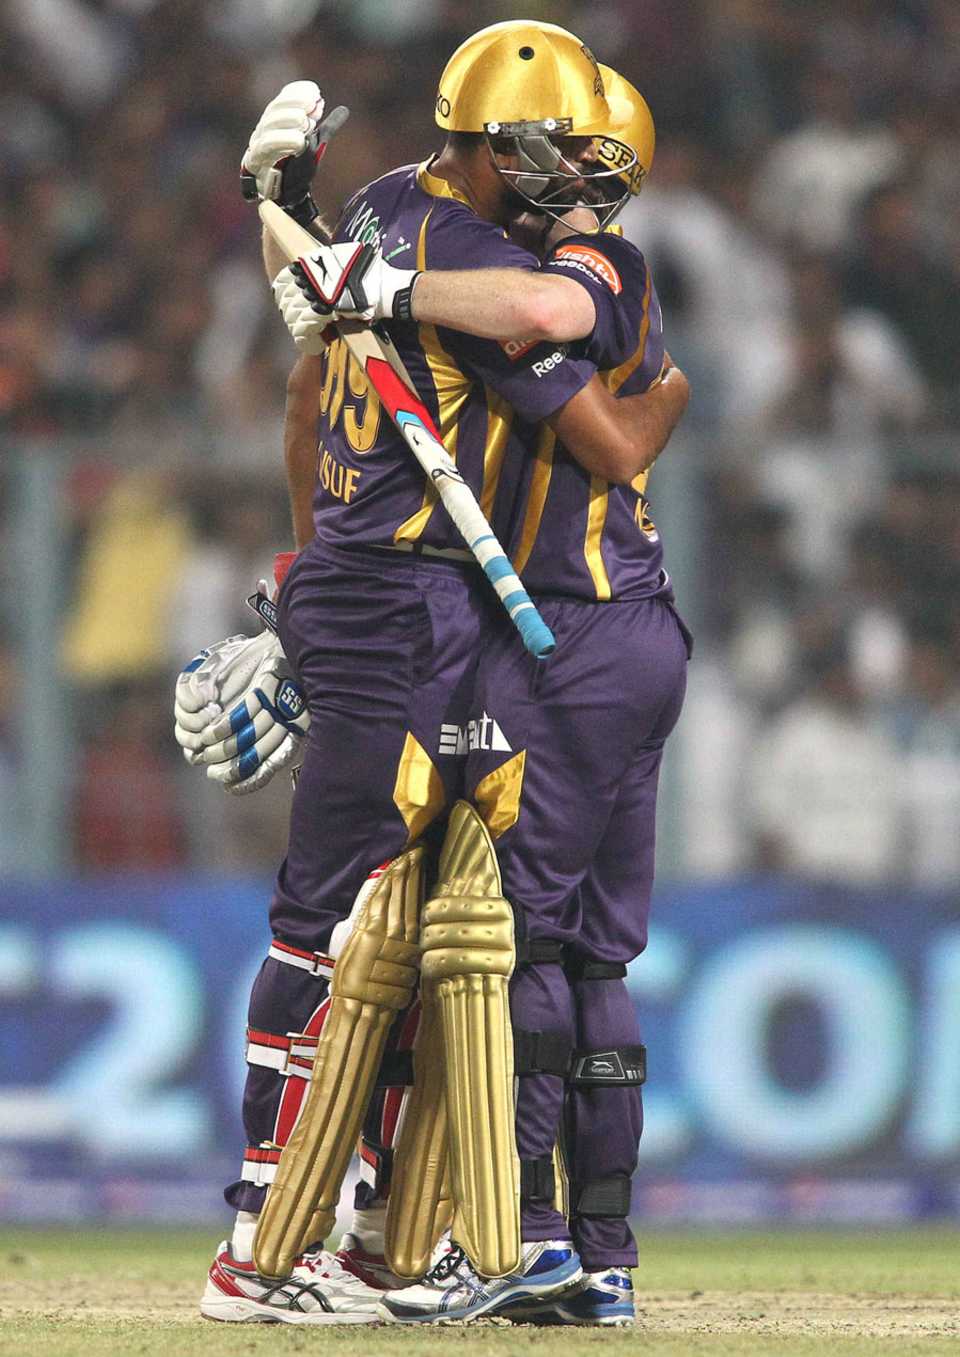 Yusuf Pathan and Eoin Morgan embrace one another after leading Kolkata Knight Riders to victory